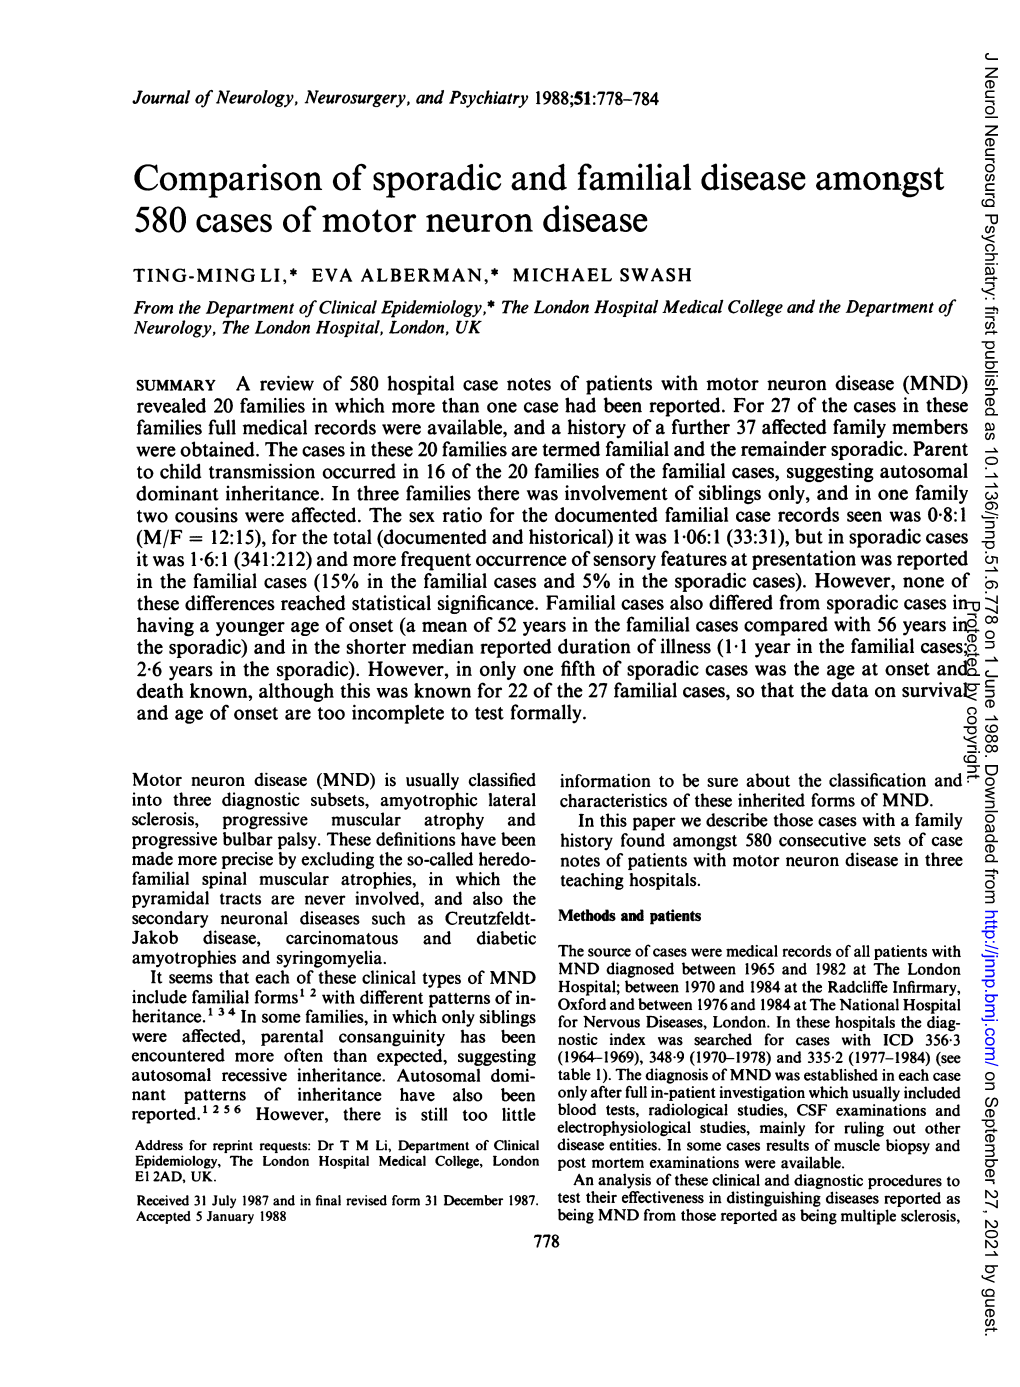 Comparison of Sporadic and Familial Disease Amongst 580 Cases of Motor Neuron Disease